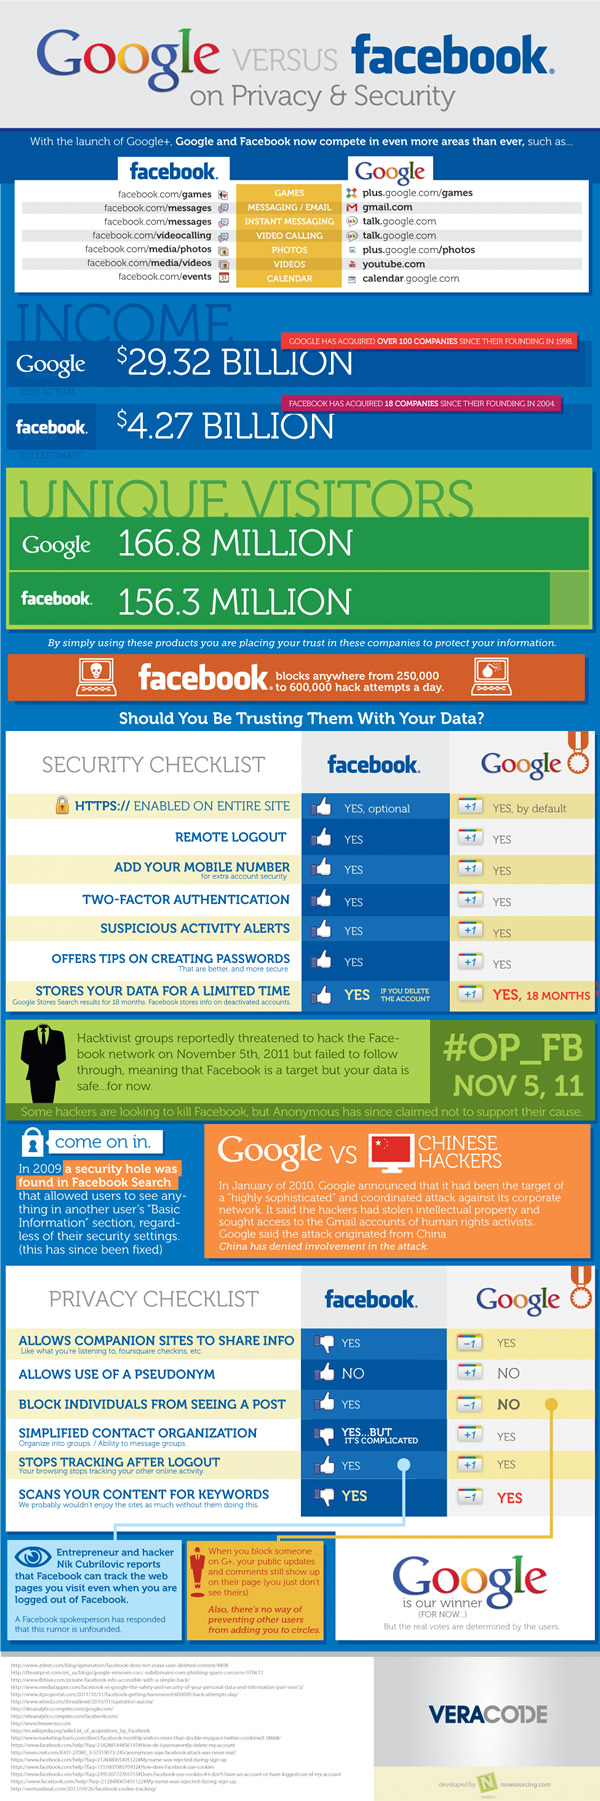 google vs. facebook on privacy security